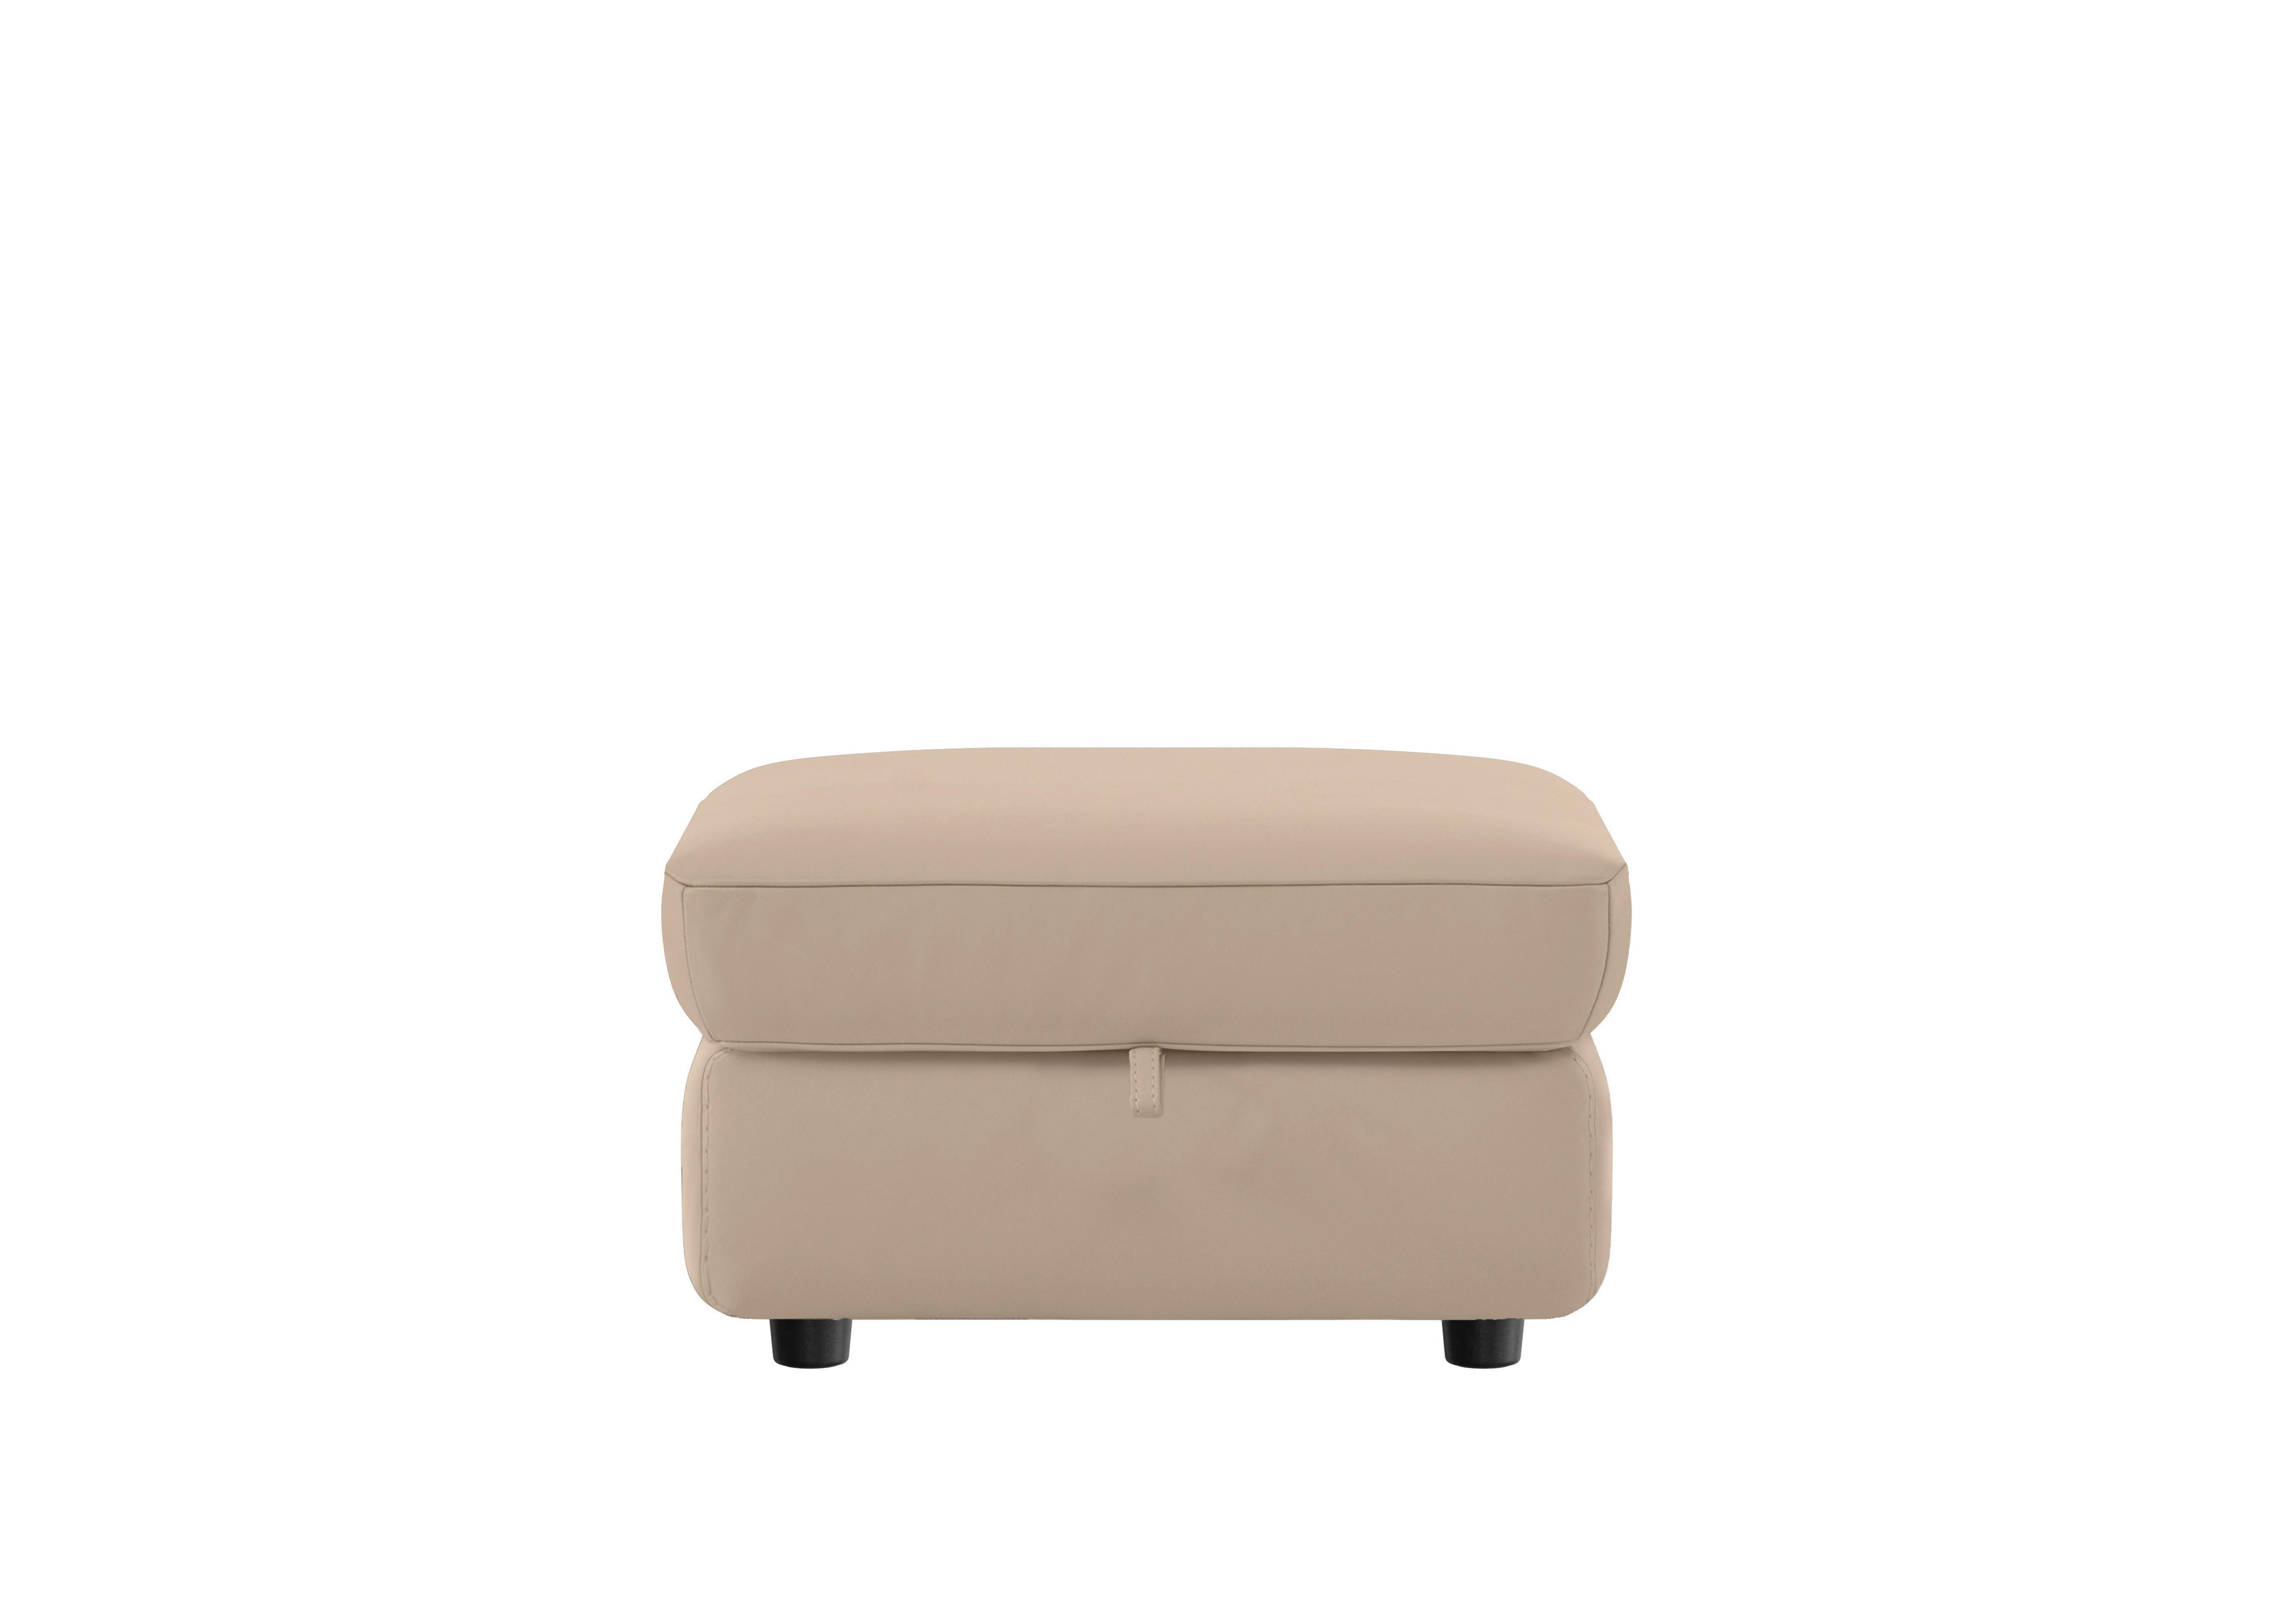 Compact Collection Piccolo Leather Storage Footstool in Bv-039c Pebble on Furniture Village